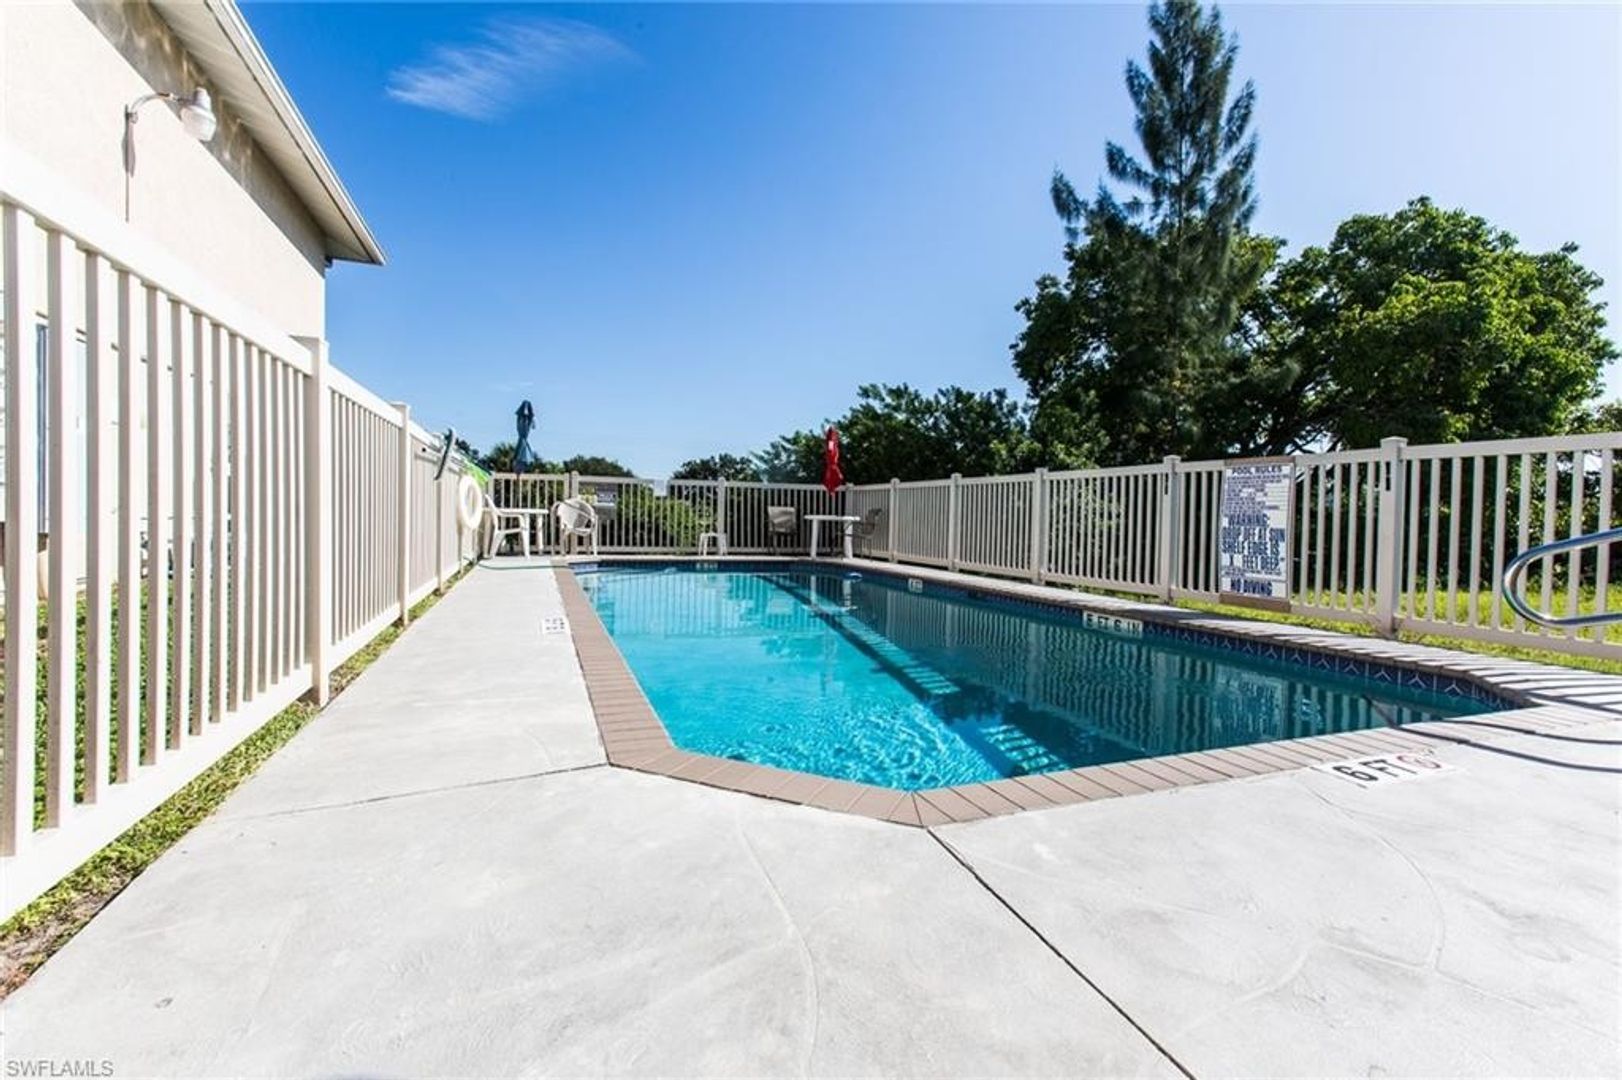 2 Bedroom 2 Bath Gulf Access Apartment with Community Pool